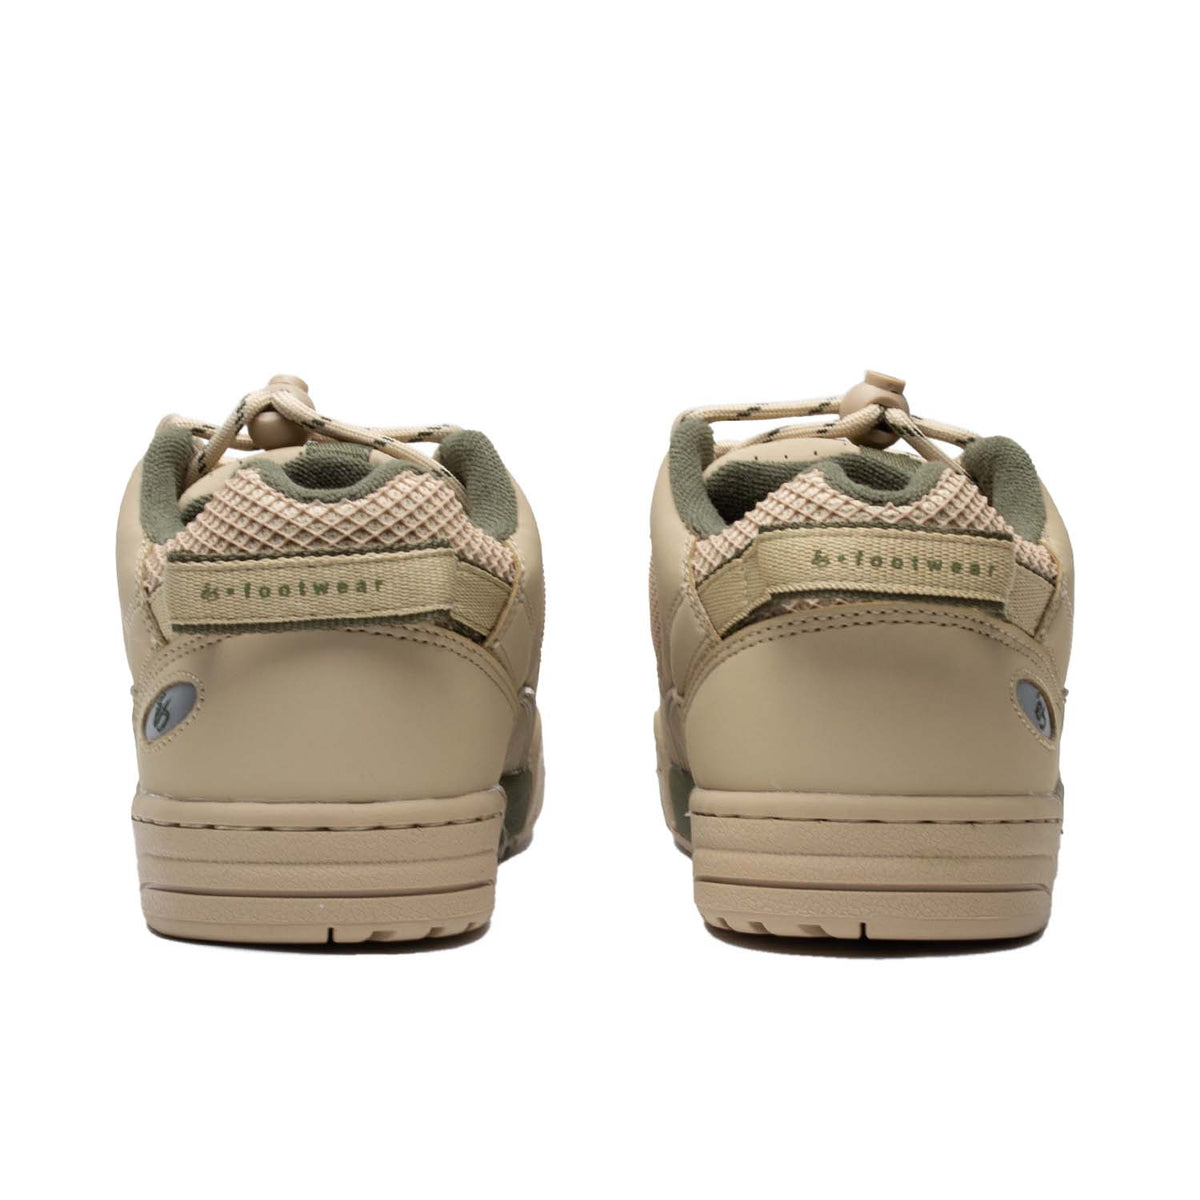 The Es Muska in tan and green, endorsed by Chad Muska, is the pinnacle of skateboarding footwear. Its PU cage and heel mesh offer durability, while the rubber toe cap and lace protection ensure longevity. Features like the hidden stash pocket, heel pull tab, and reflective logo on the heel add convenience and style. With a molded EVA footbed and 400 NBS rubber cupsole, it provides comfort and grip, ideal for skaters of all levels.